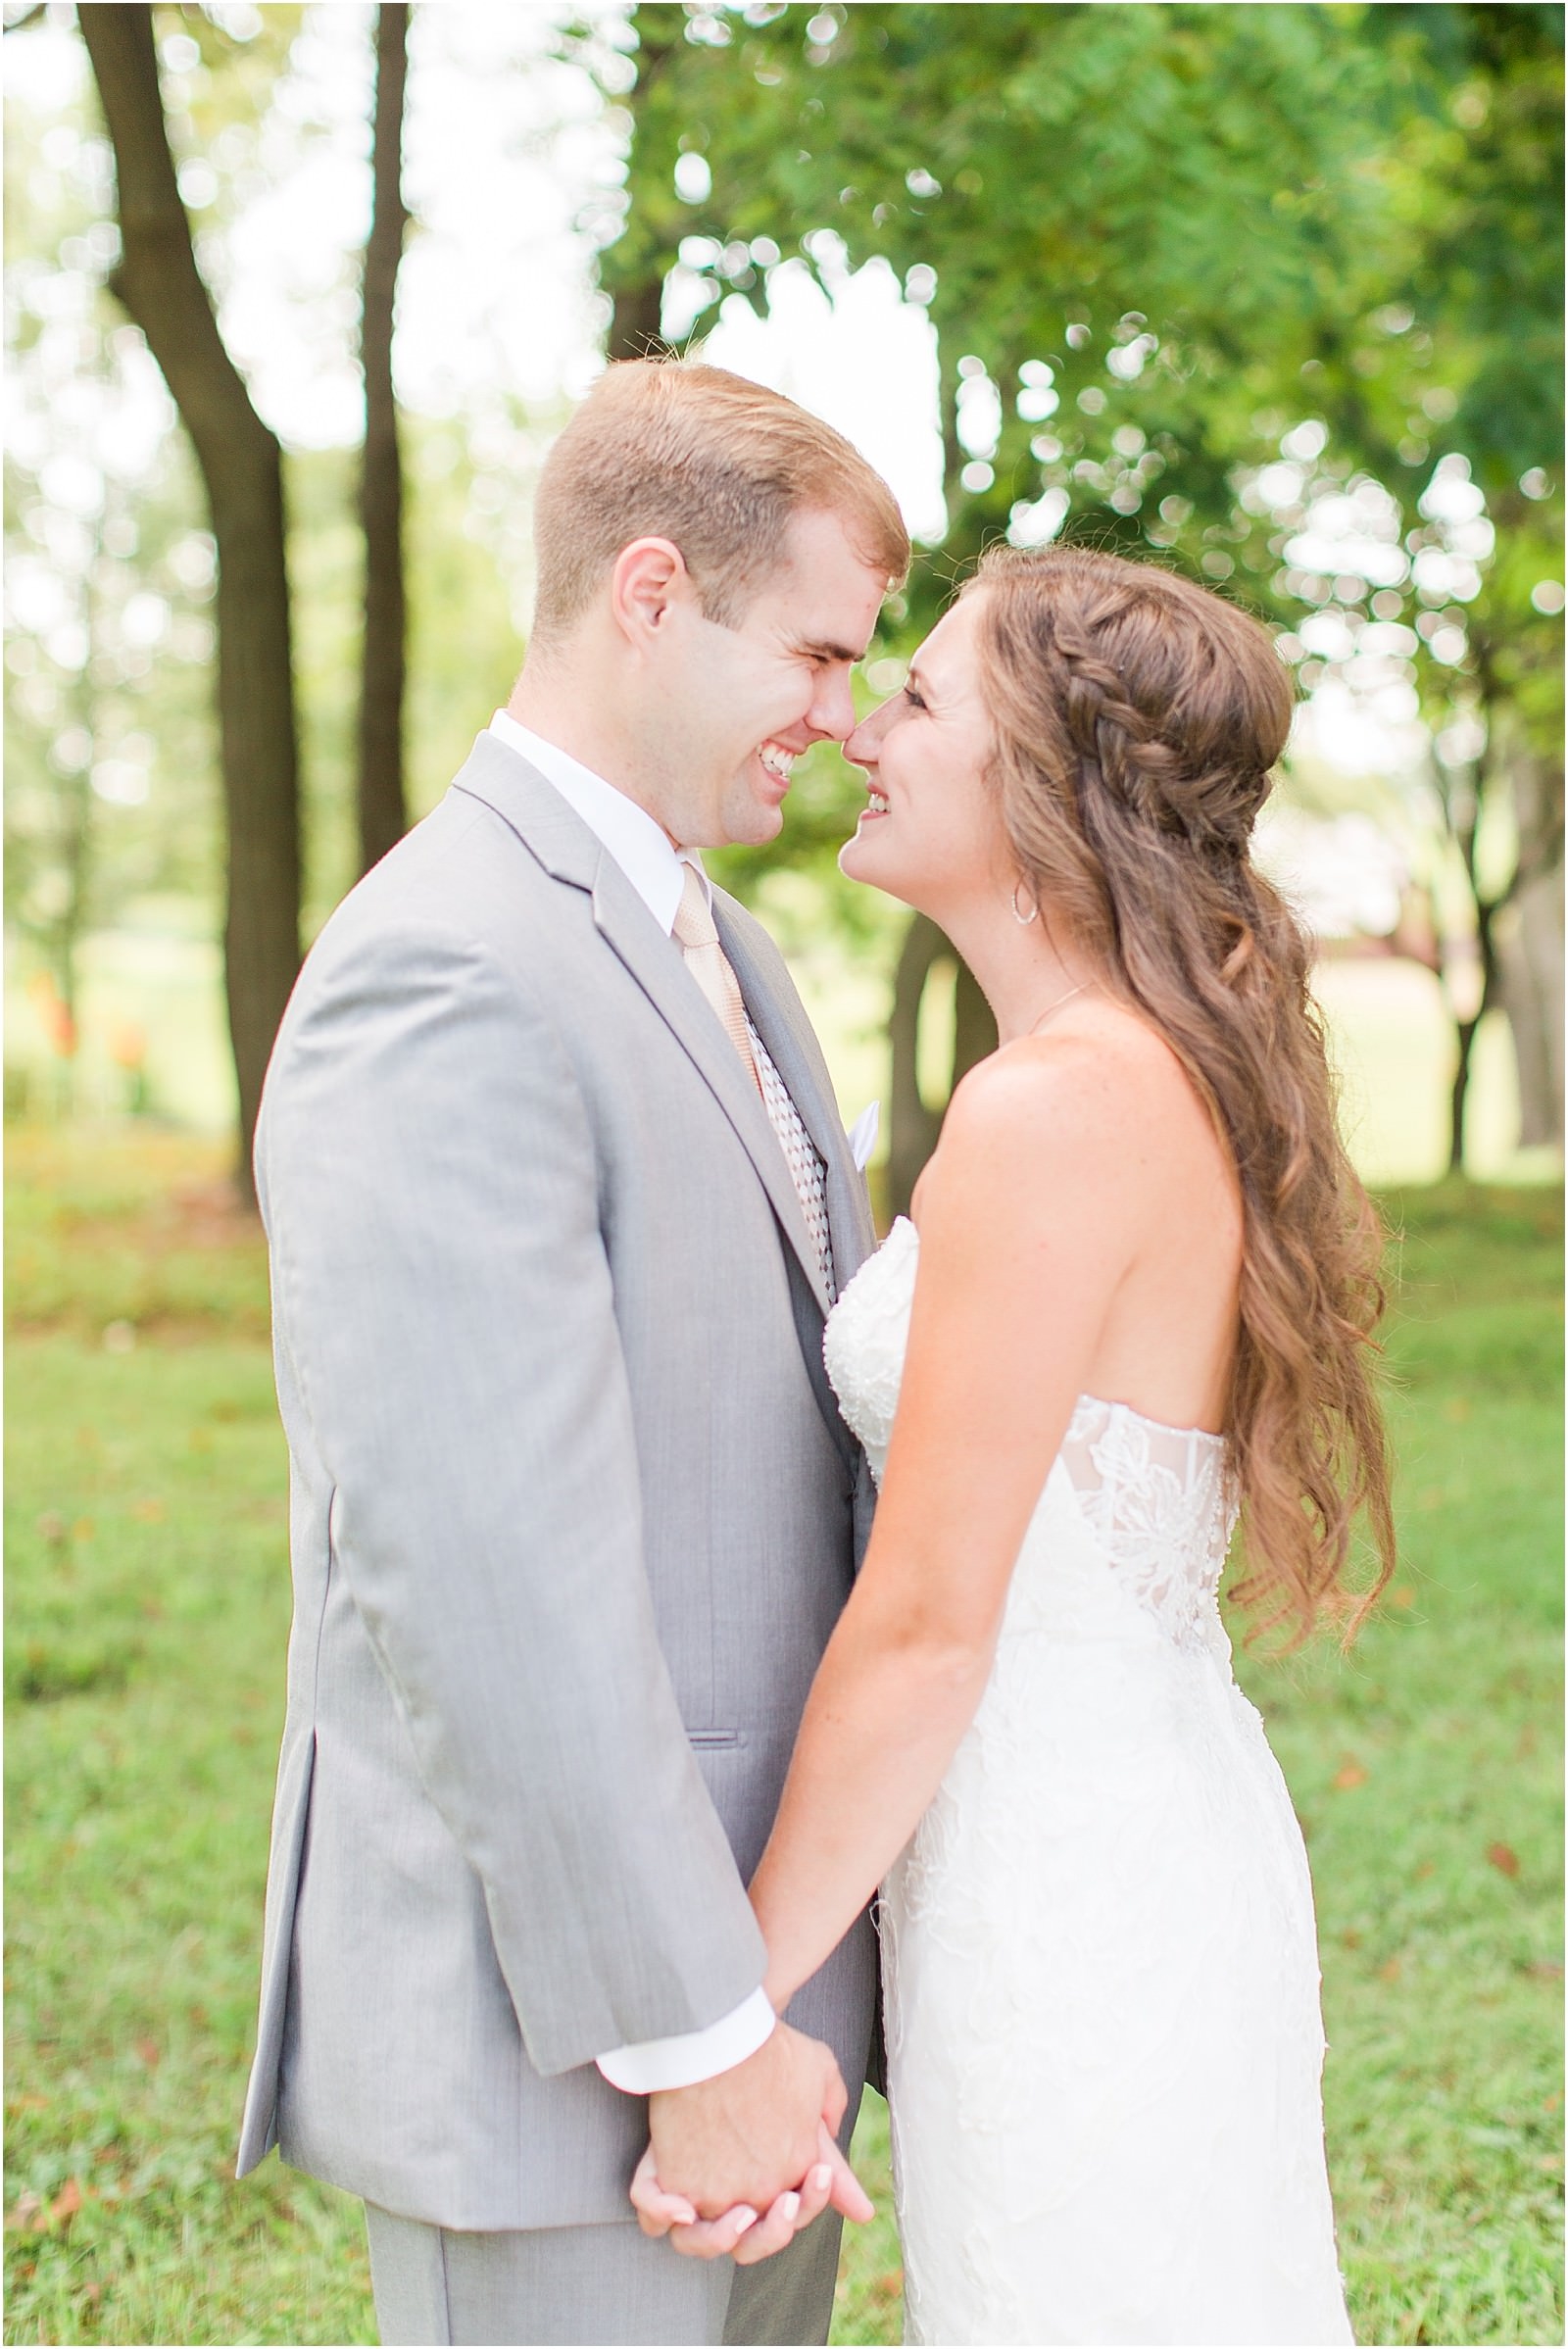 Stacey and Thomas | Blog051.jpg